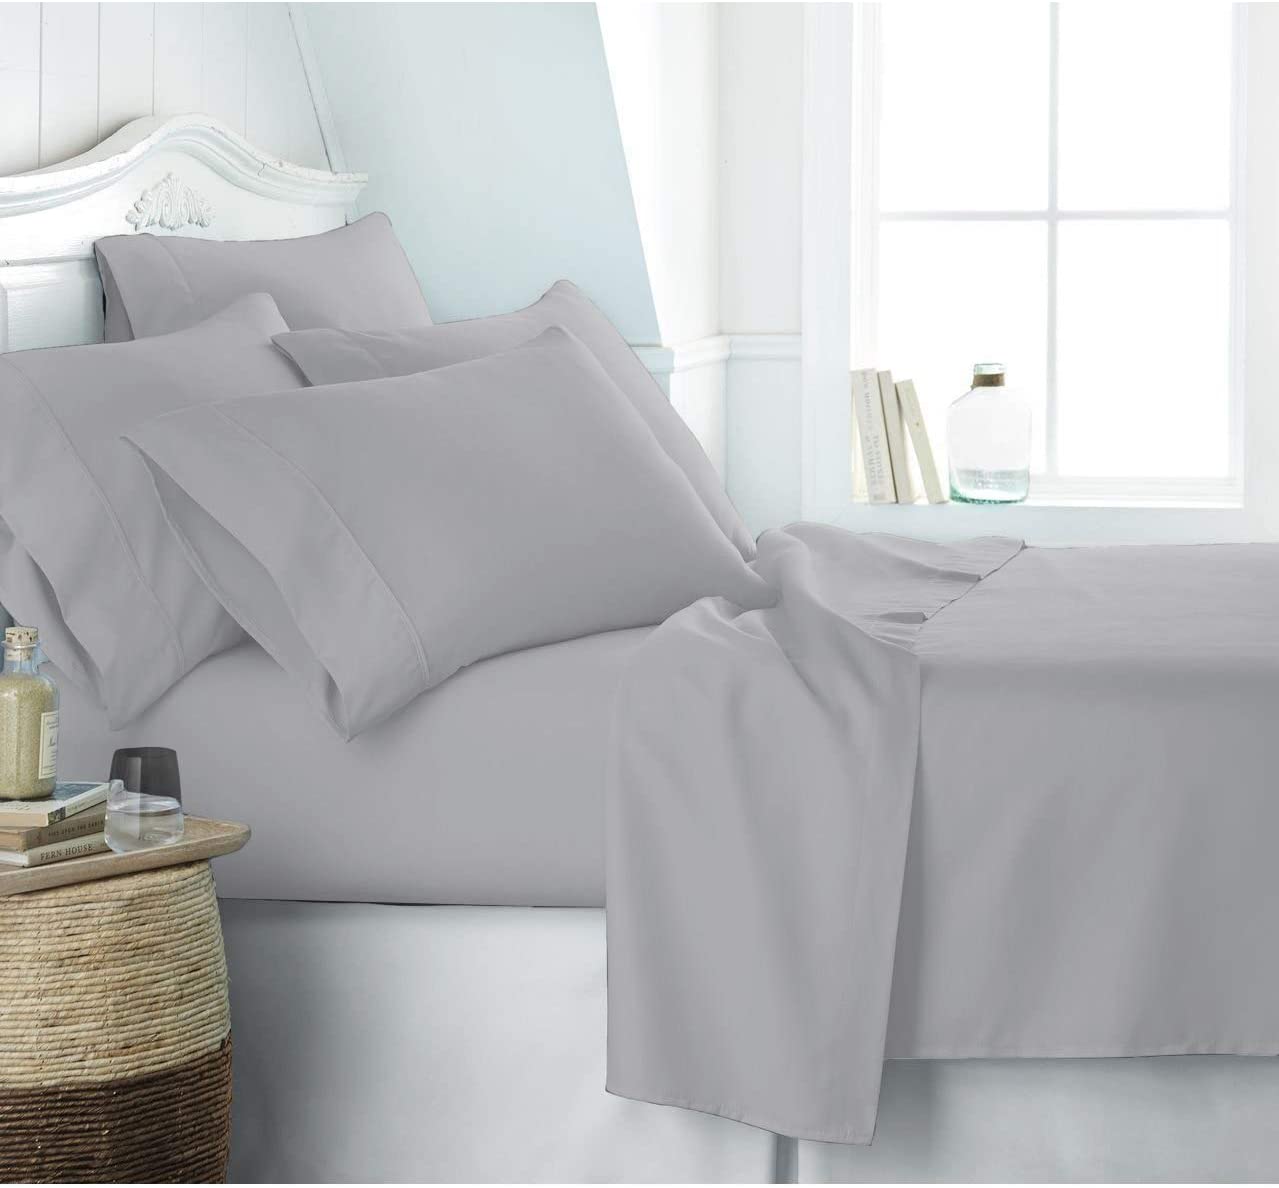 100% Pure Egyptian Cotton Cal King Ivory Sheet Set – 400 Thread Count- 4 Piece- Sateen Weave- Long Staple Combed Cotton-Extra Soft Smooth Silky- Sateen Weave (Cal King ,Ivory)